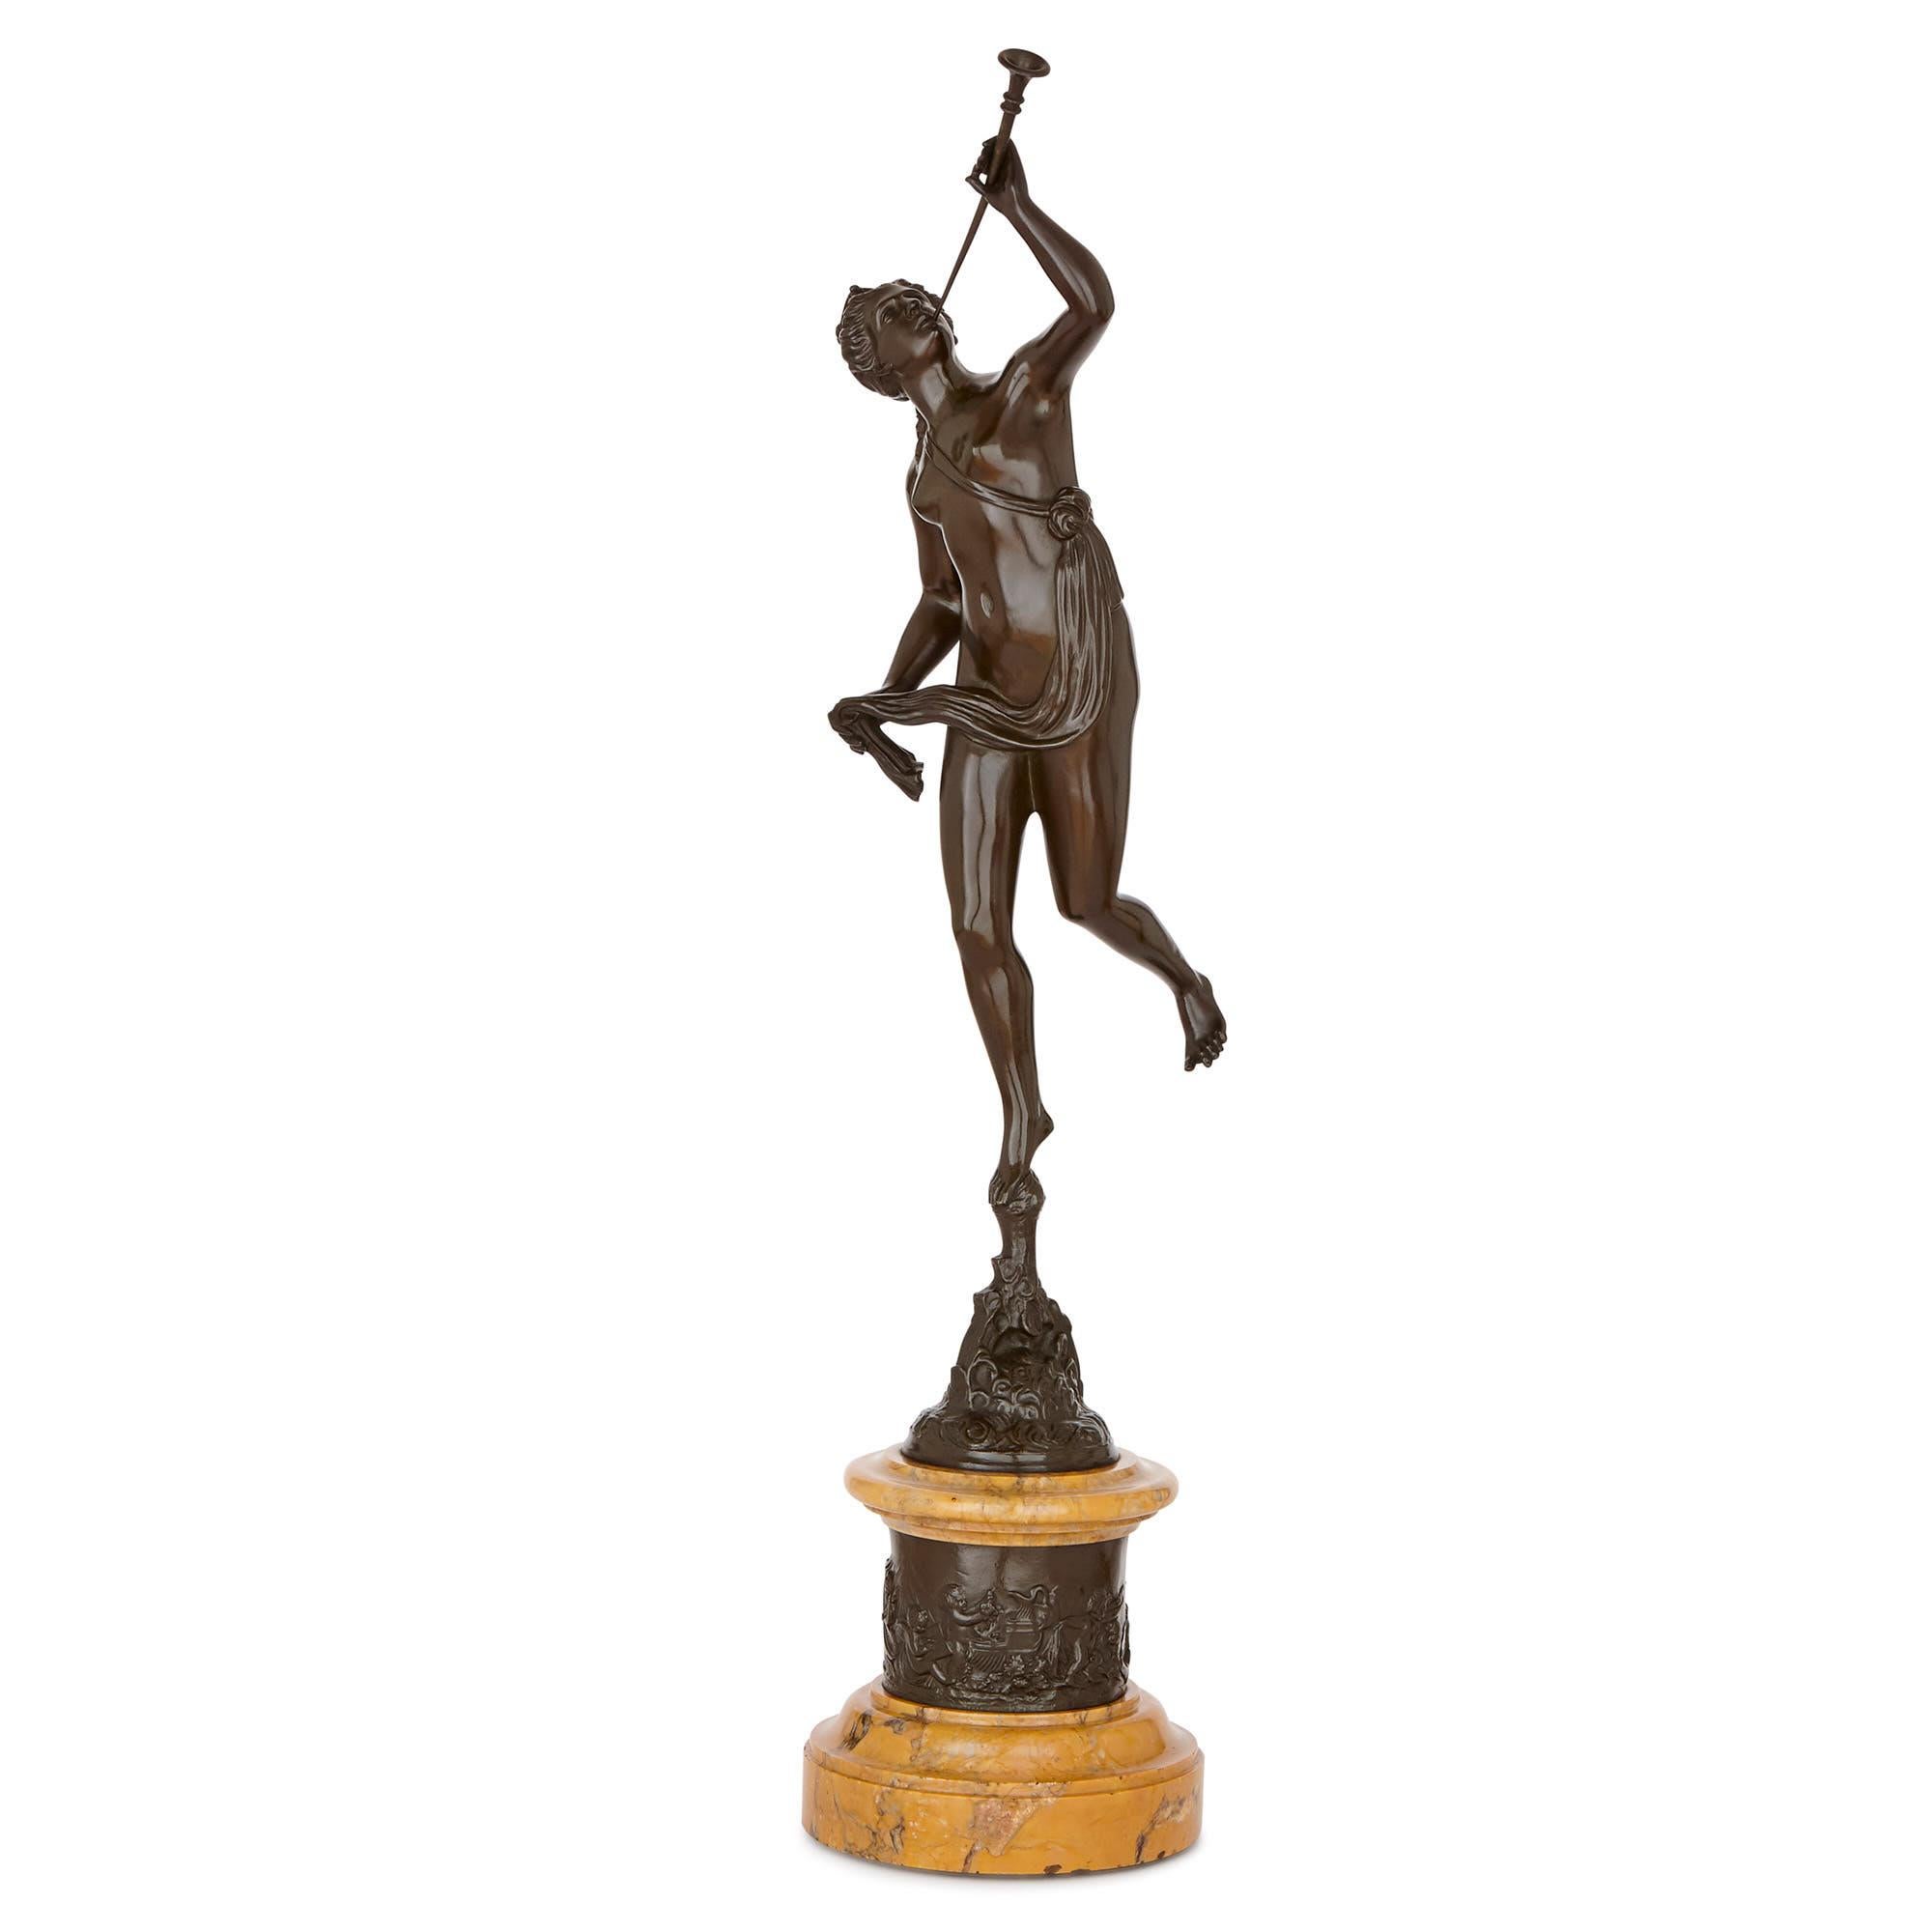 These French 19th century sculptures depict the Roman deities, Mercury and Fortuna. In Roman religion and mythology, Mercury was responsible for delivering messages to the Olympian gods and guiding souls to the underworld. He is thus the god of